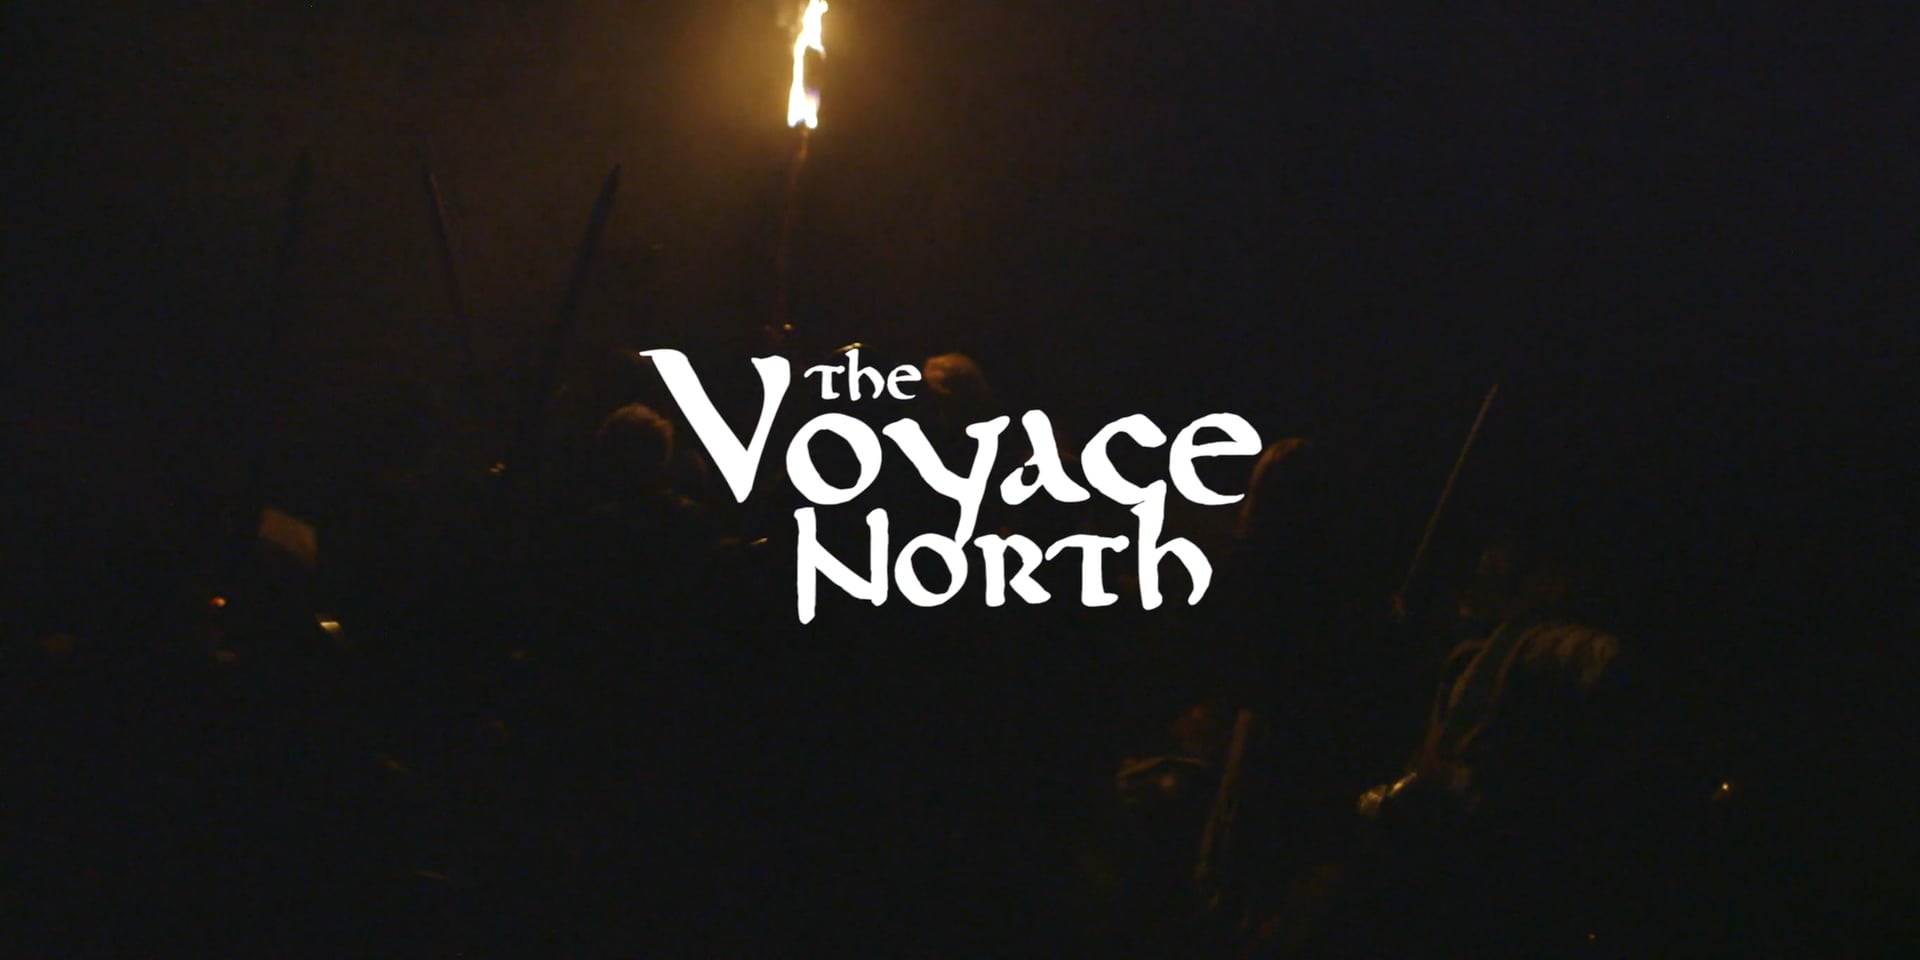 the voyage north cost